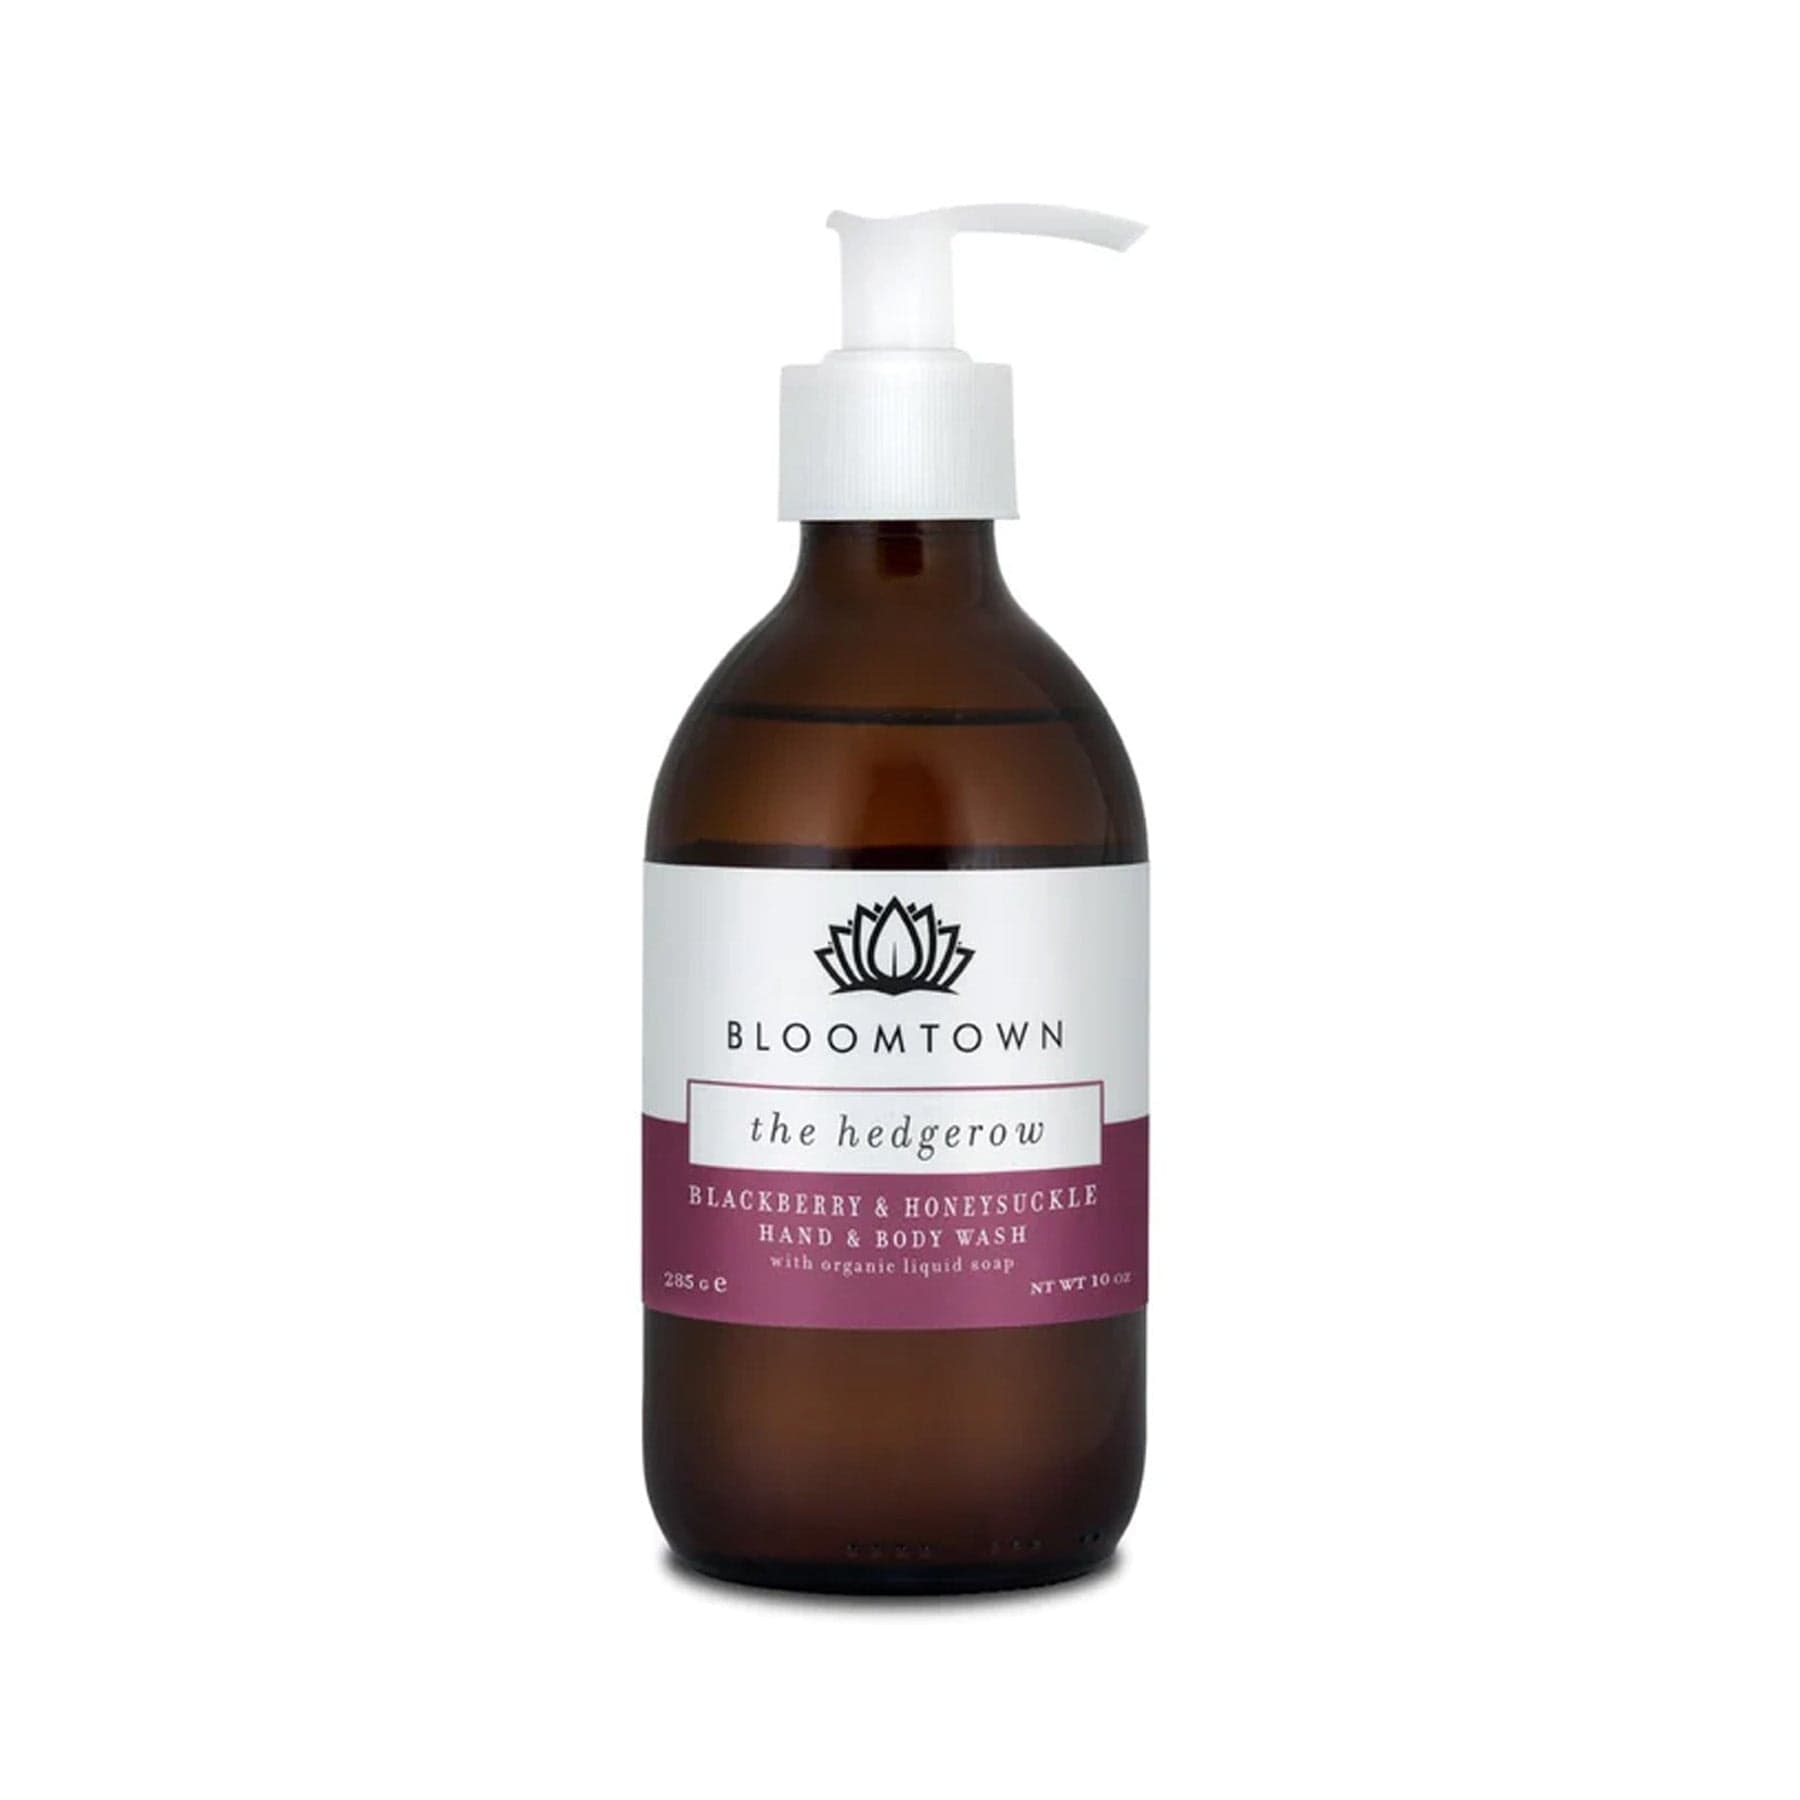 Hand & body wash - the hedgerow